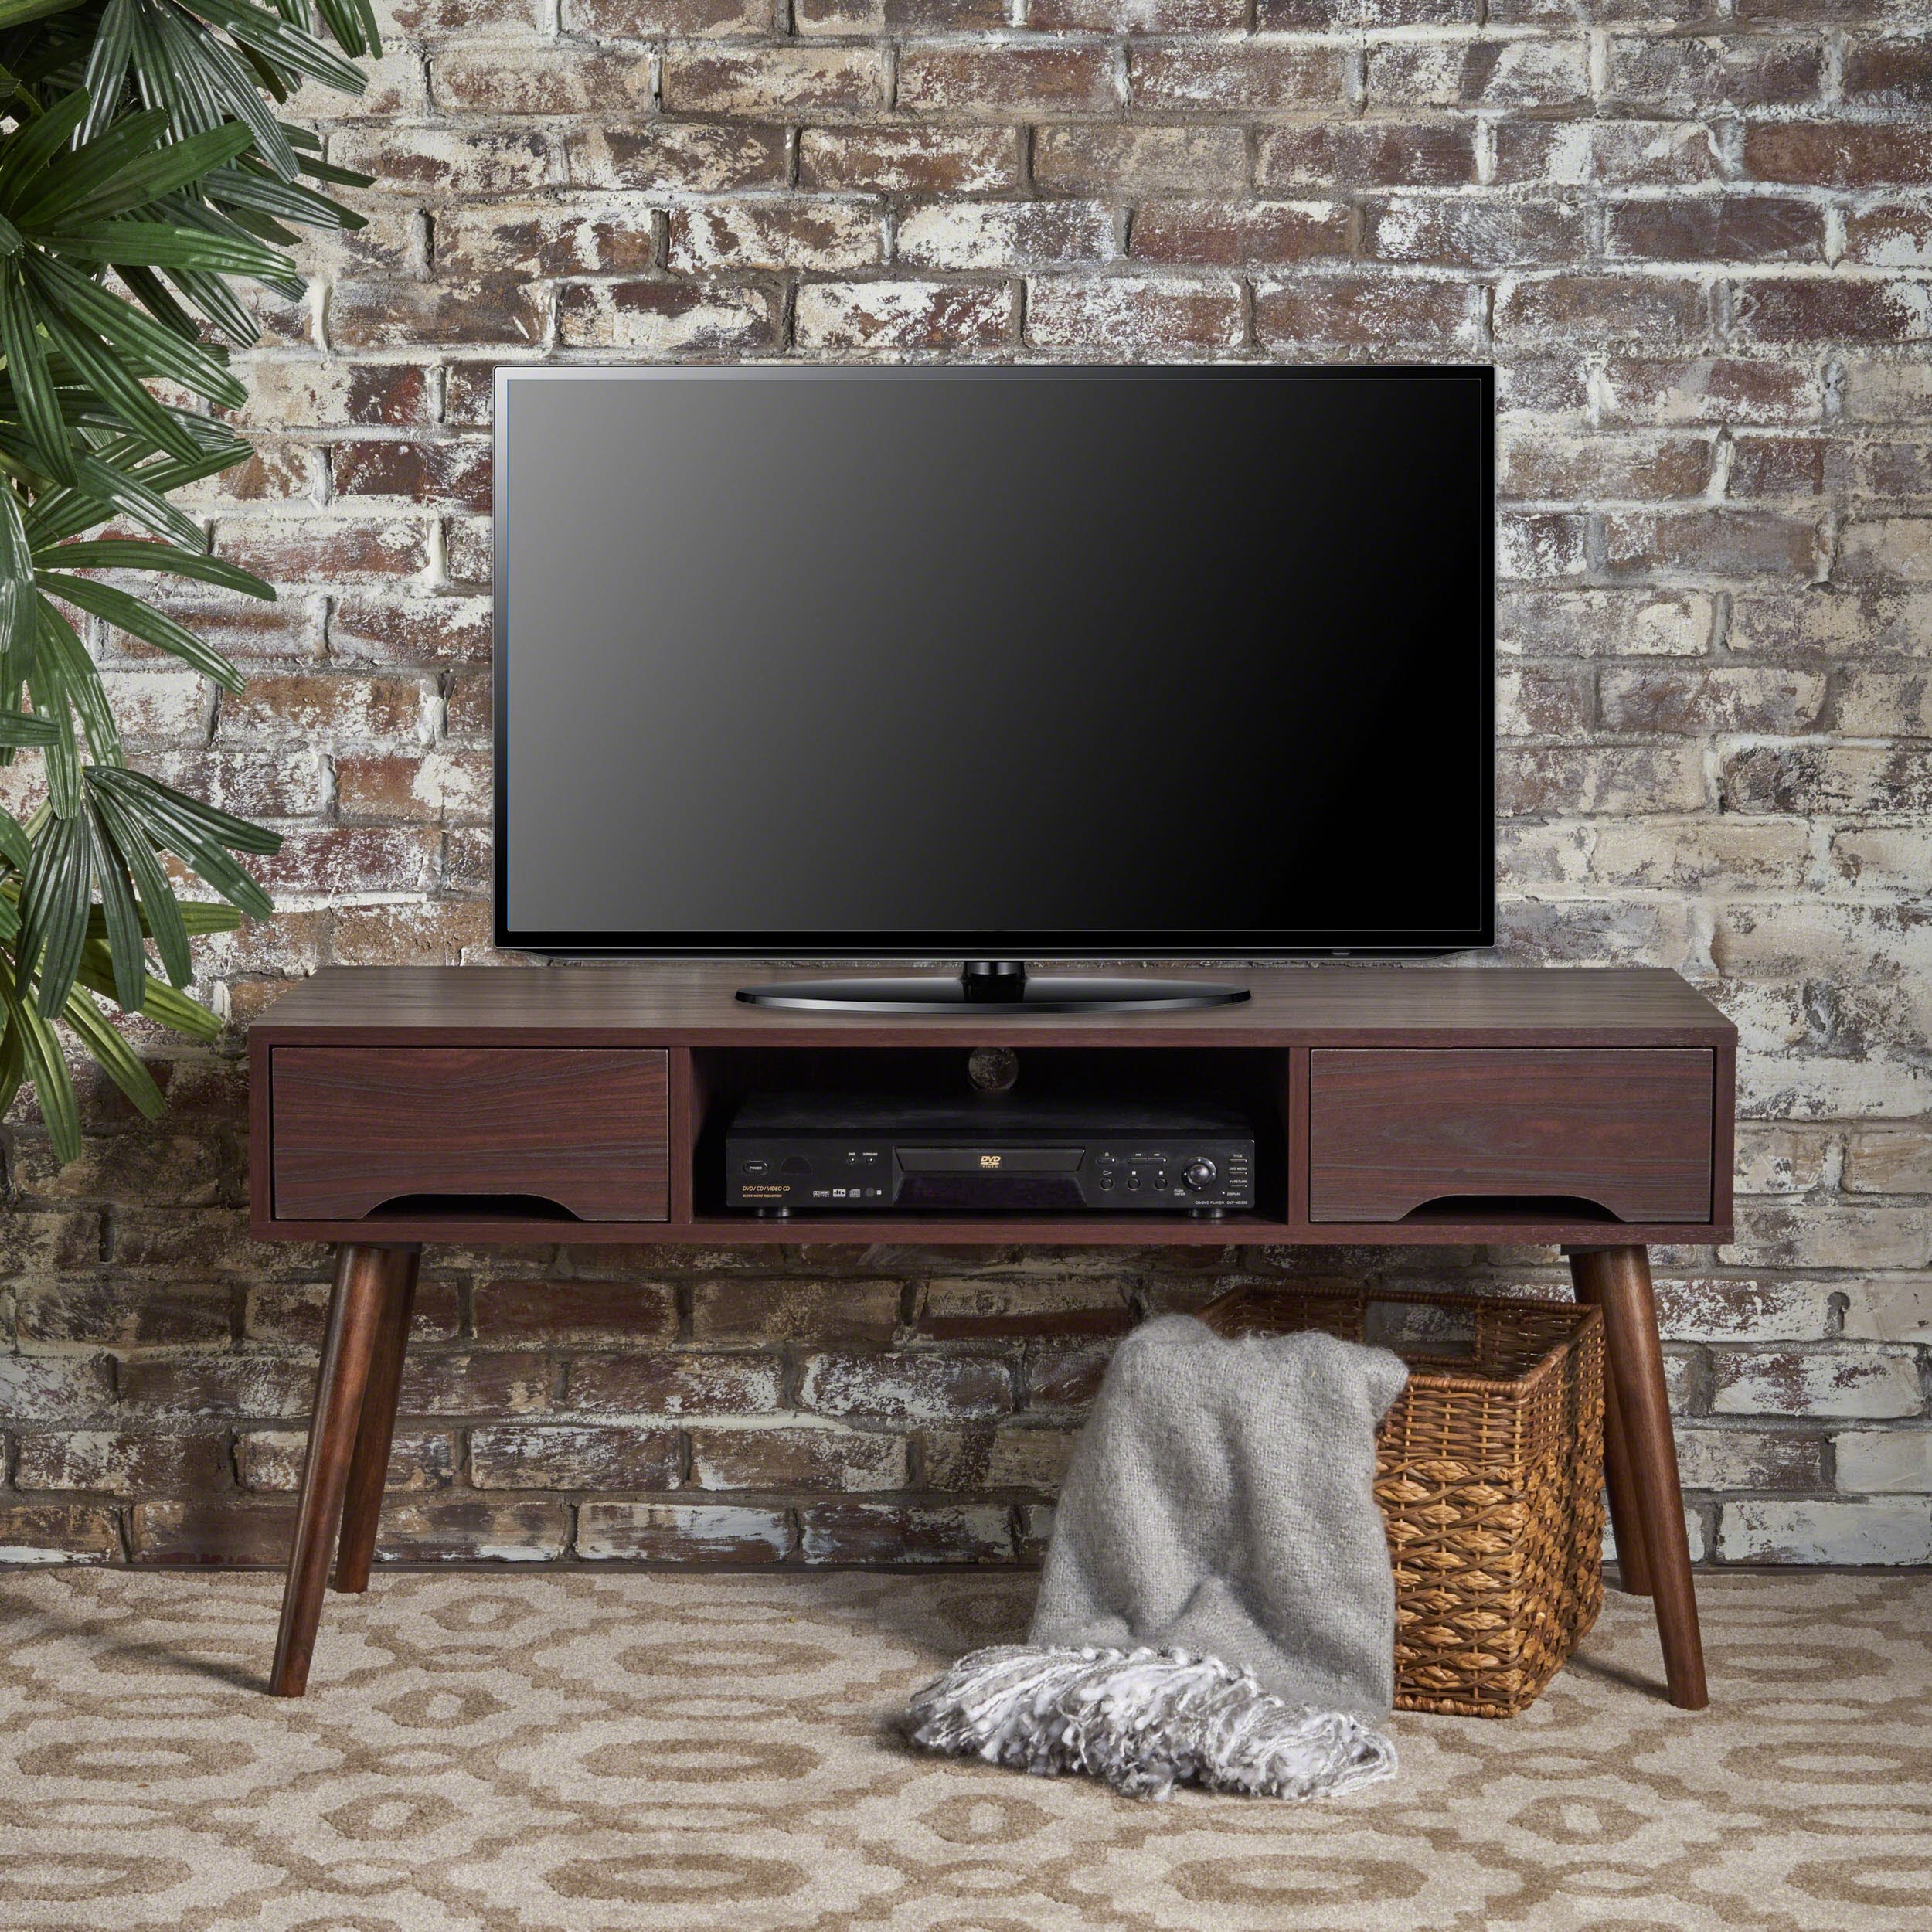 Florie Mid Century Modern Finished Fiberboard Entertainment Center - Wenge